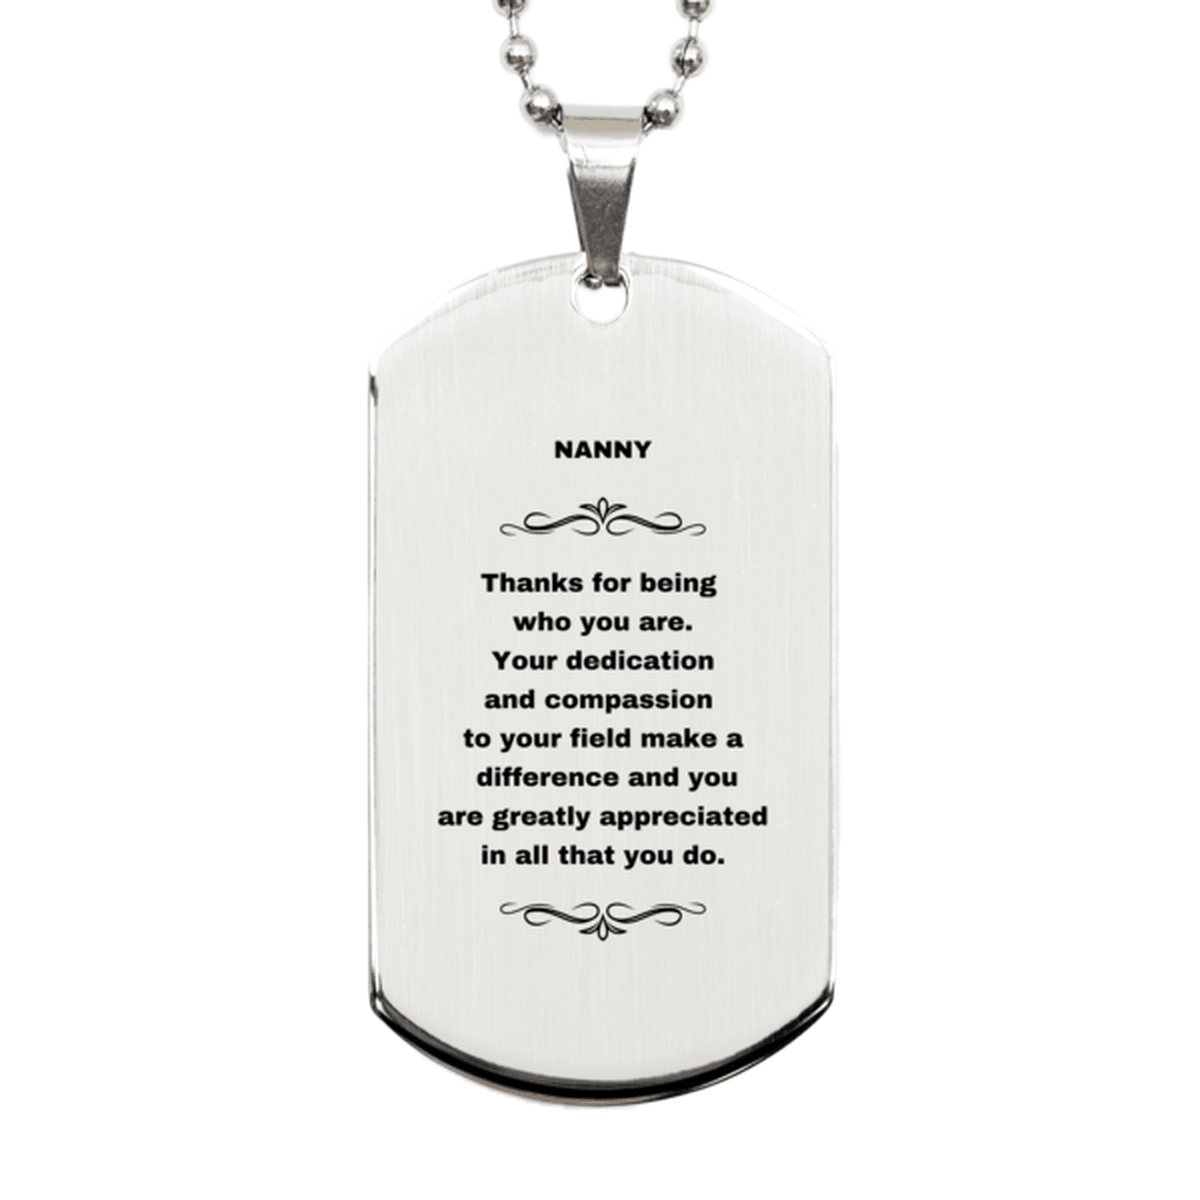 Nanny Silver Dog Tag Necklace - Thanks for being who you are - Birthday Christmas Jewelry Gifts Coworkers Colleague Boss - Mallard Moon Gift Shop